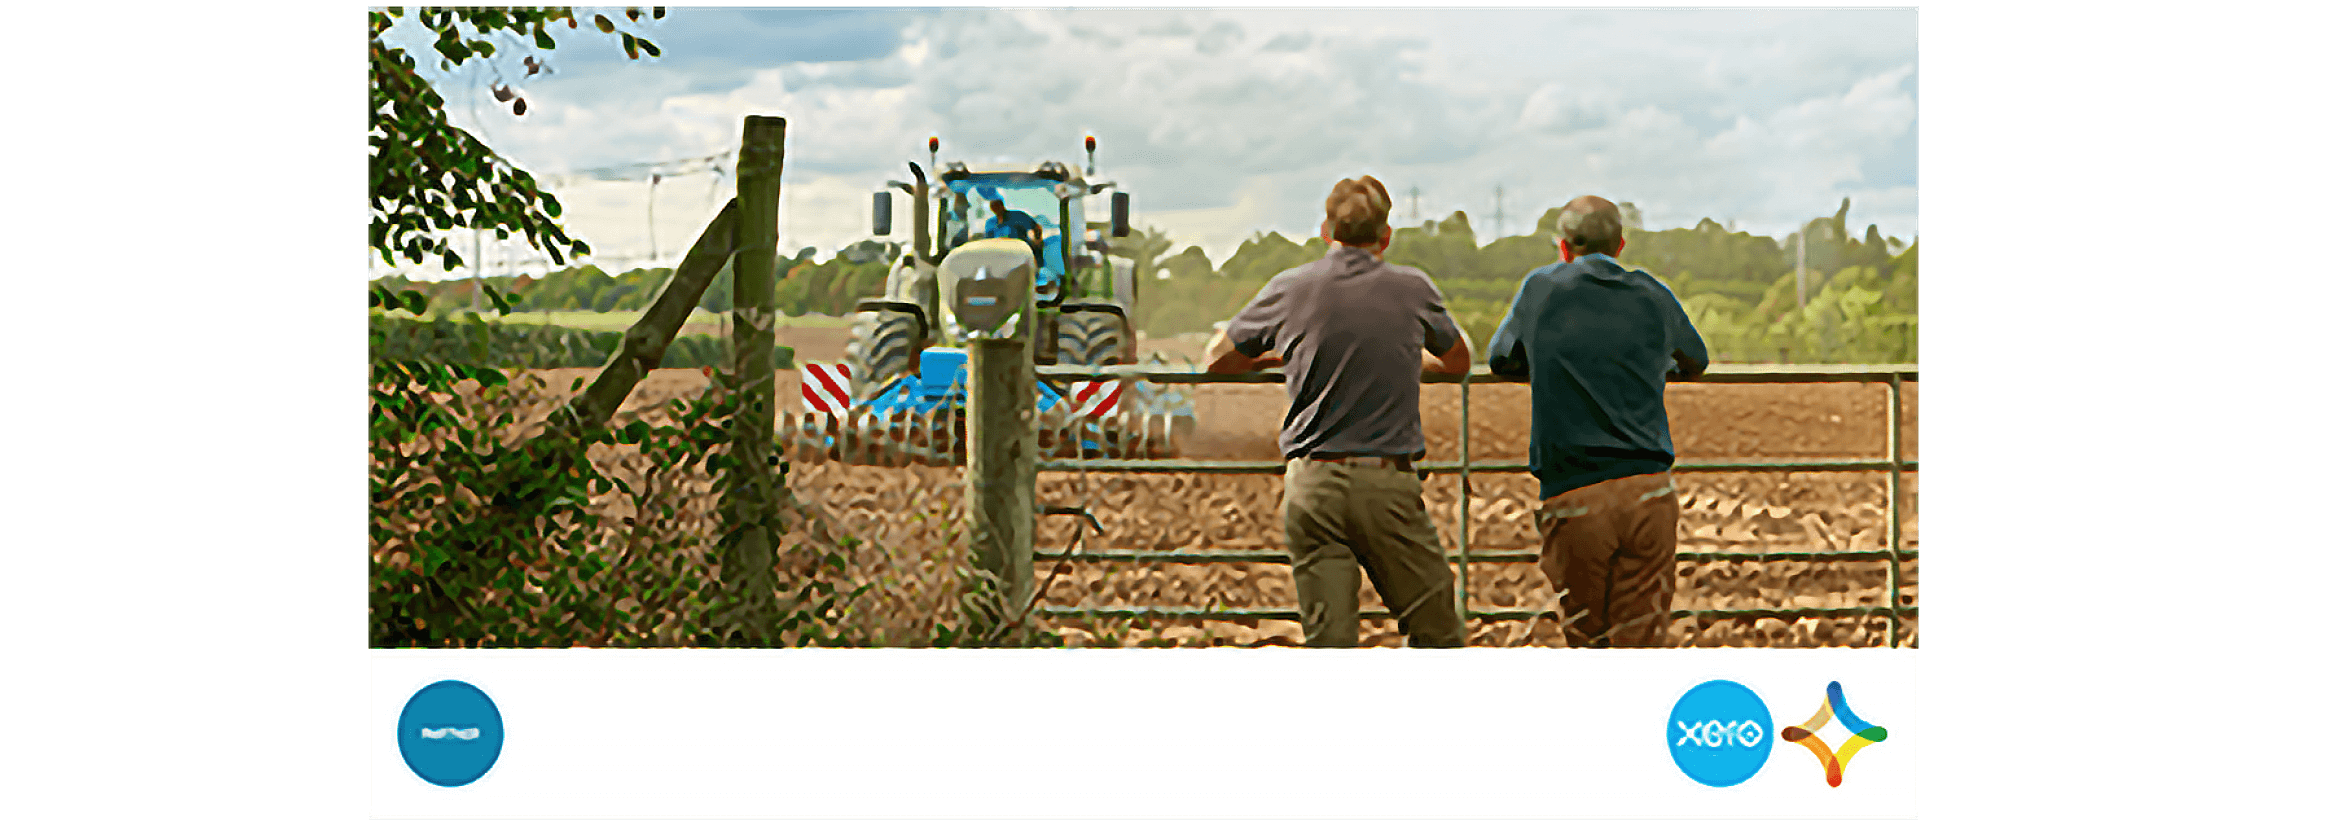 Social media tile featuring two farmers leaning on a farm fence, as a tractor ploughs the field.